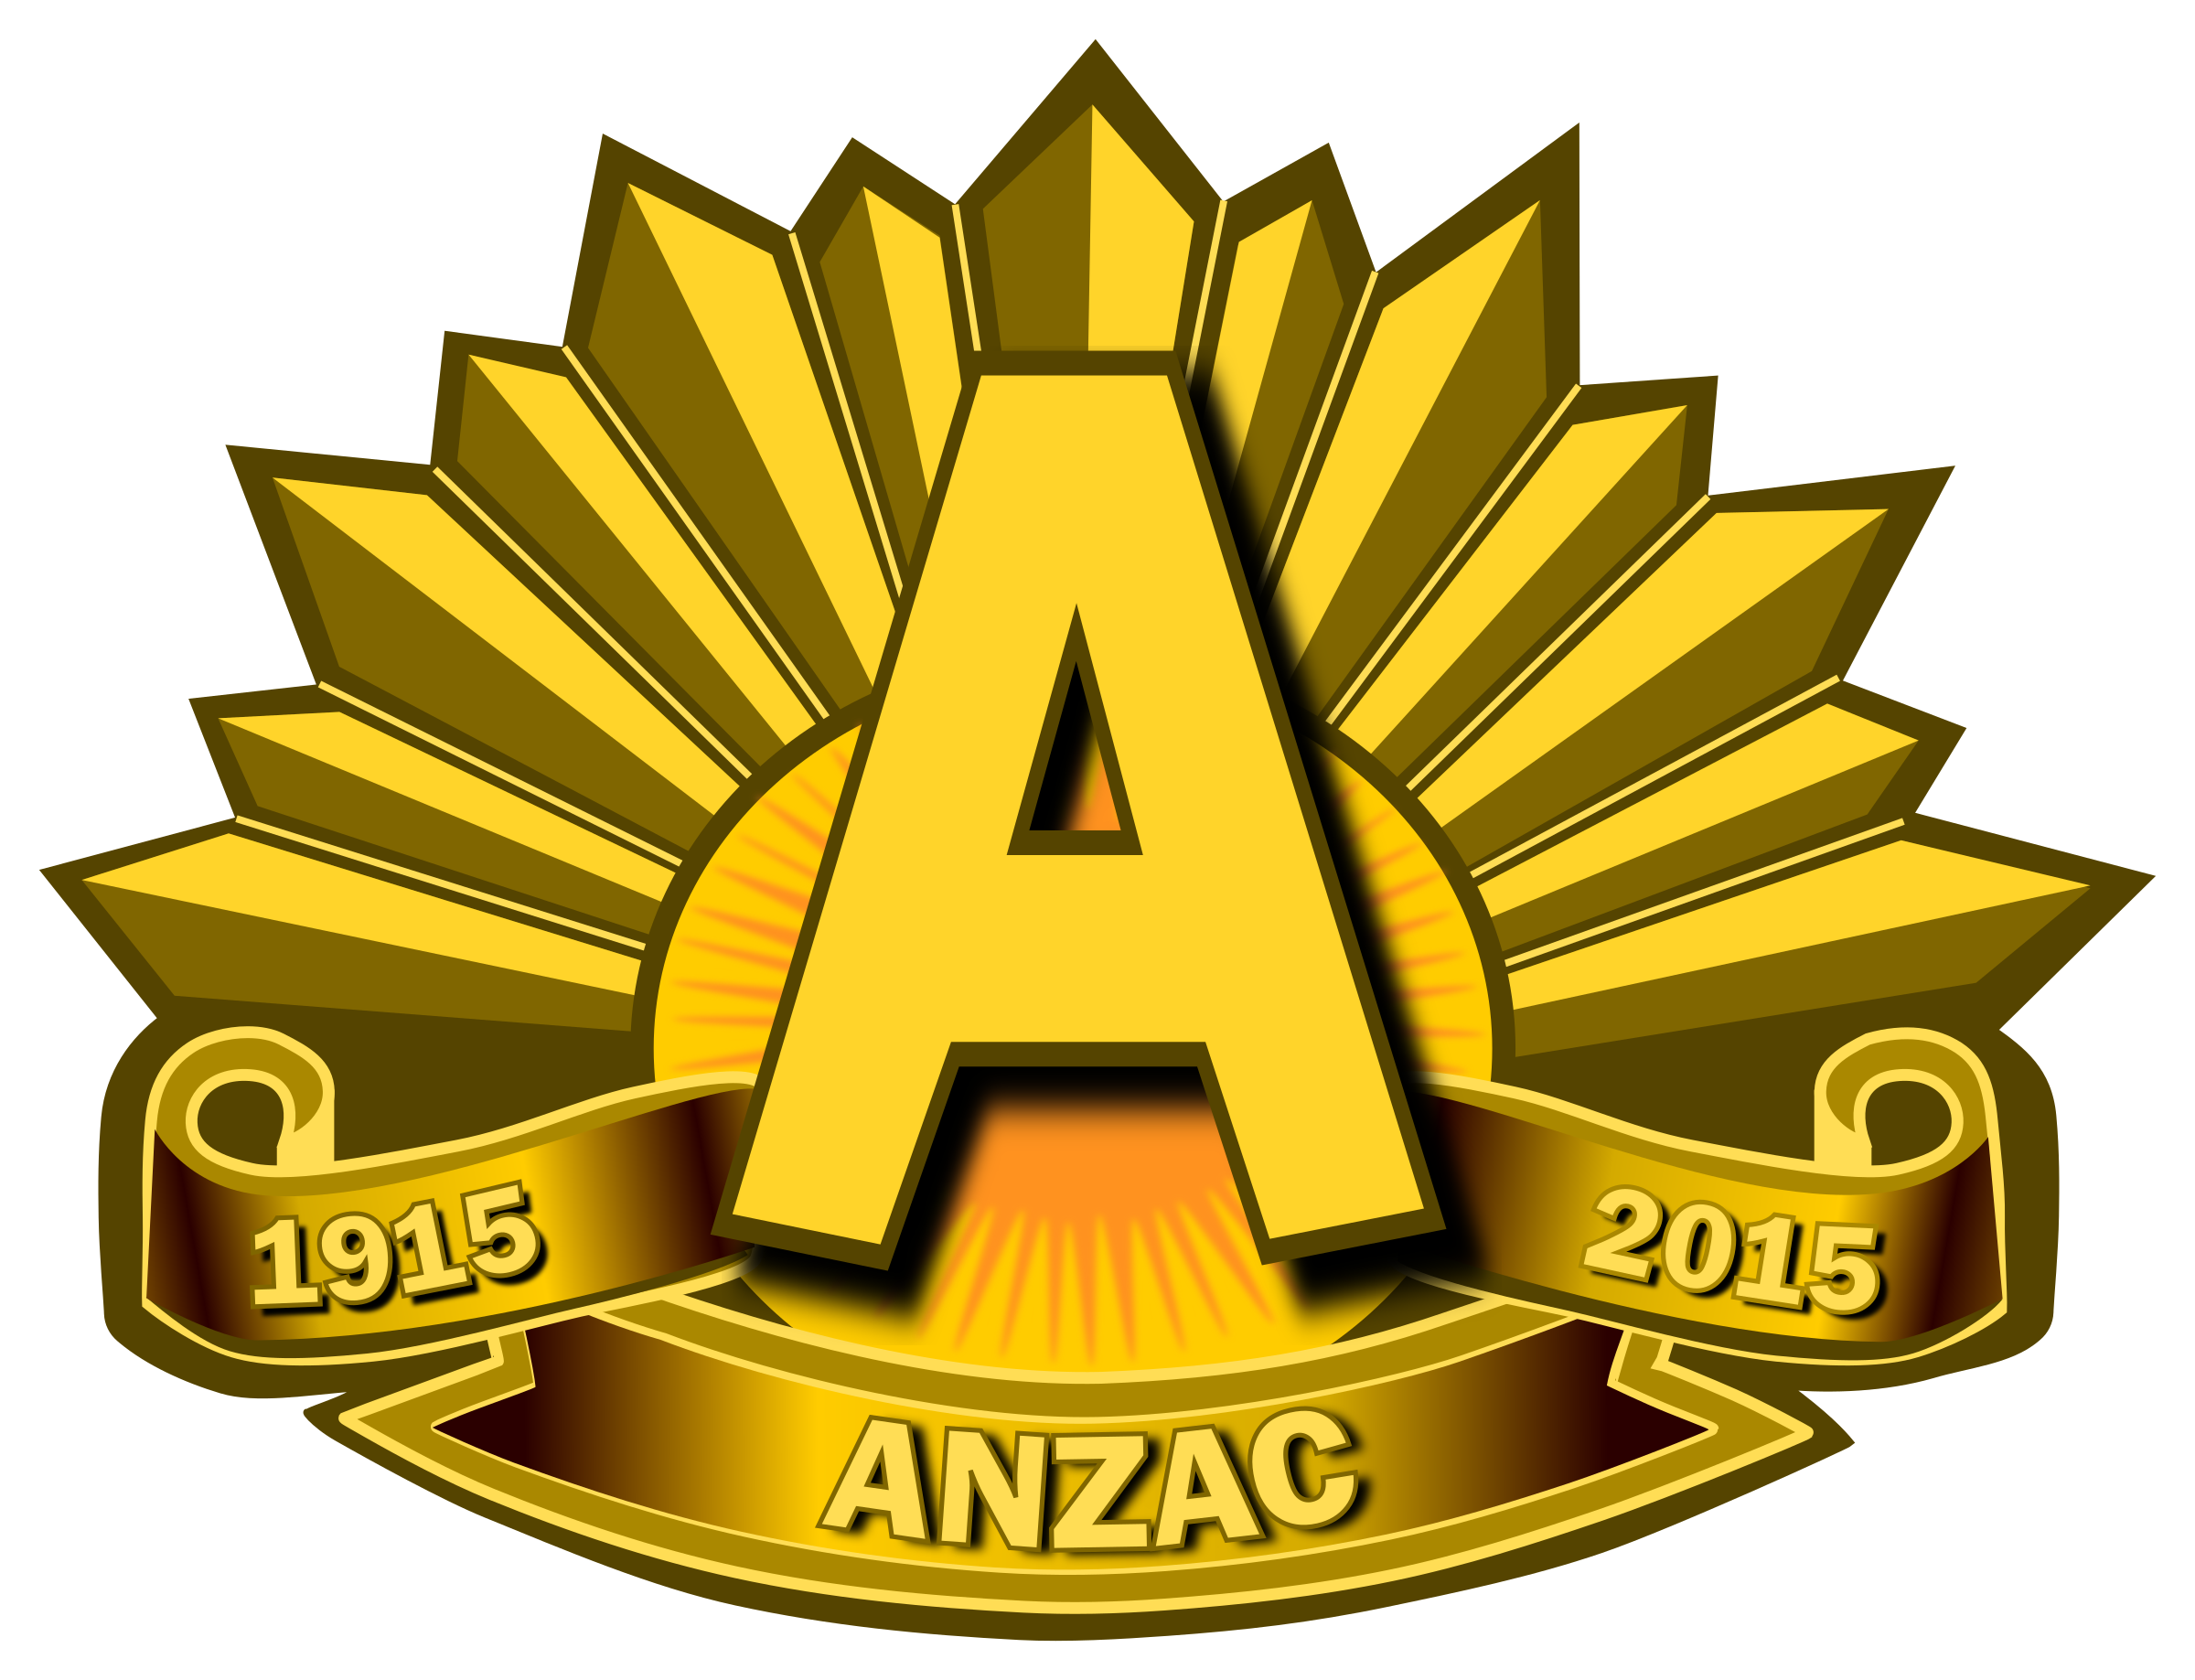 Fern clipart anzac, Fern anzac Transparent FREE for download on